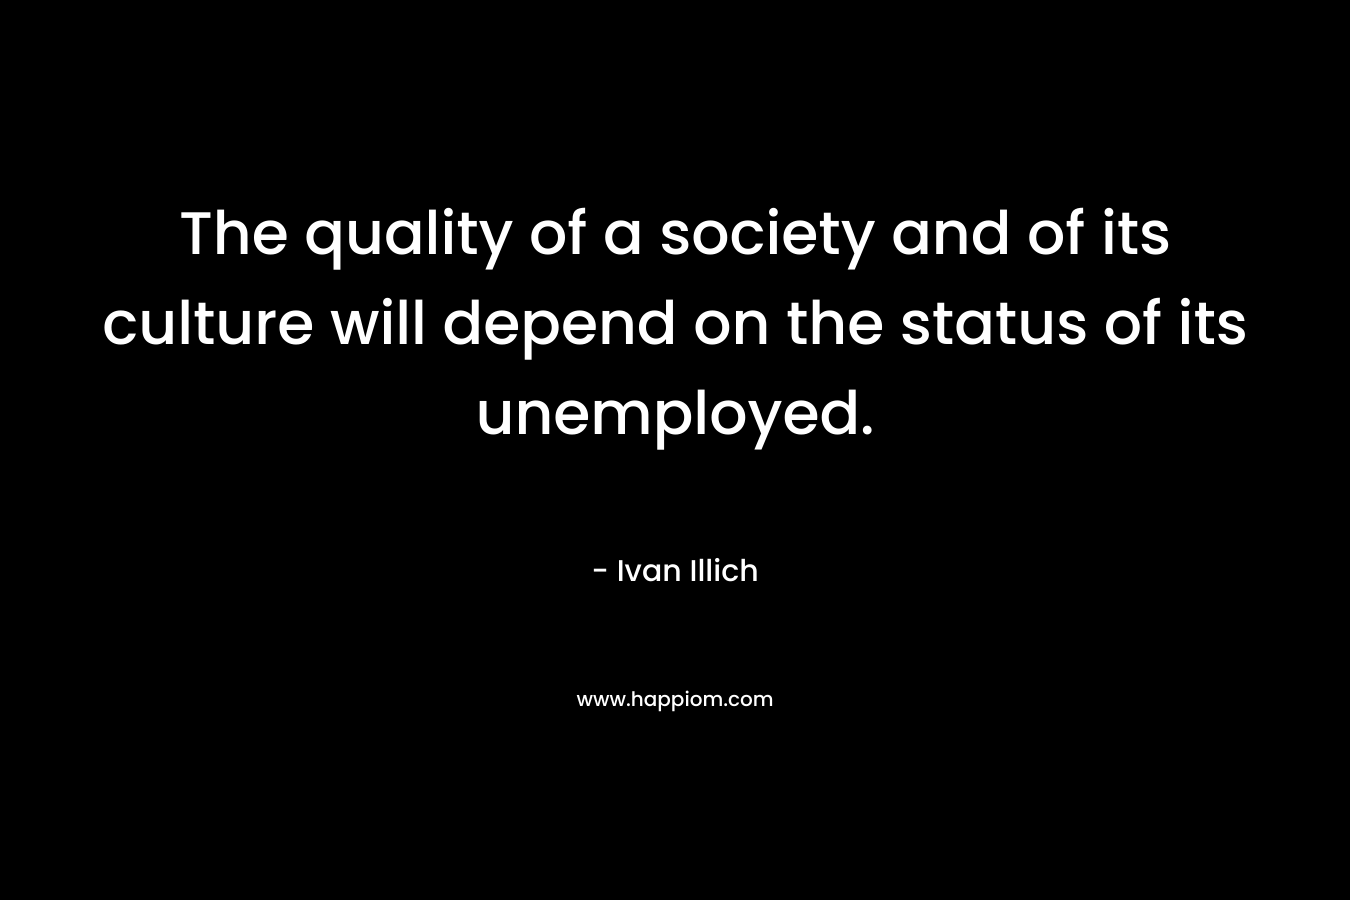 The quality of a society and of its culture will depend on the status of its unemployed.